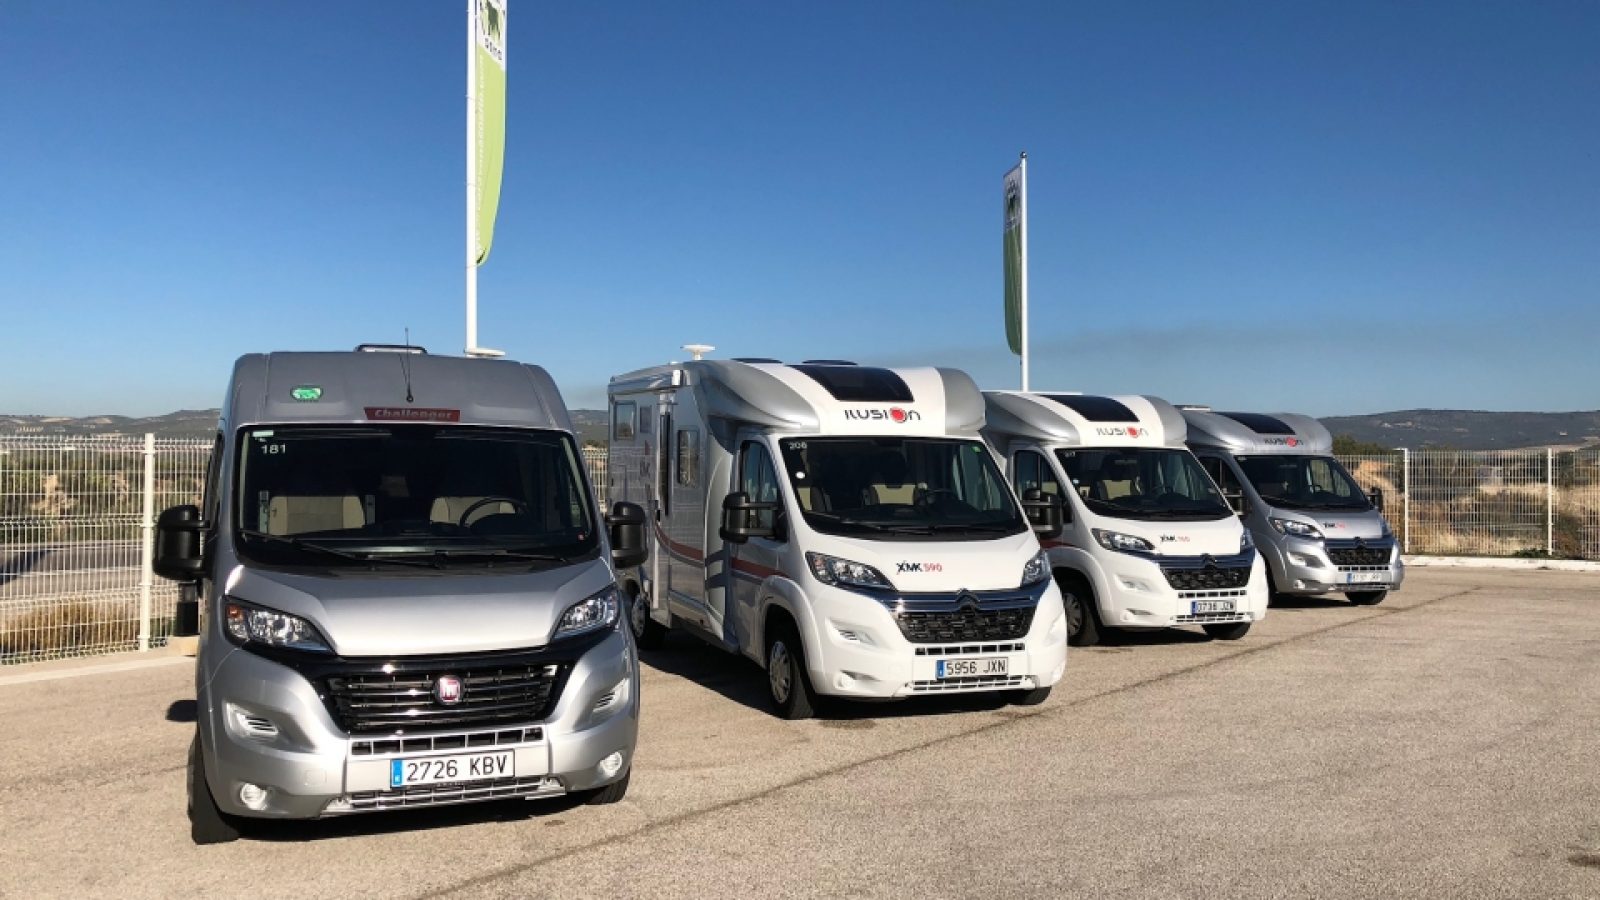 NEW SERVICE OF MOTORHOMES FOR RENT